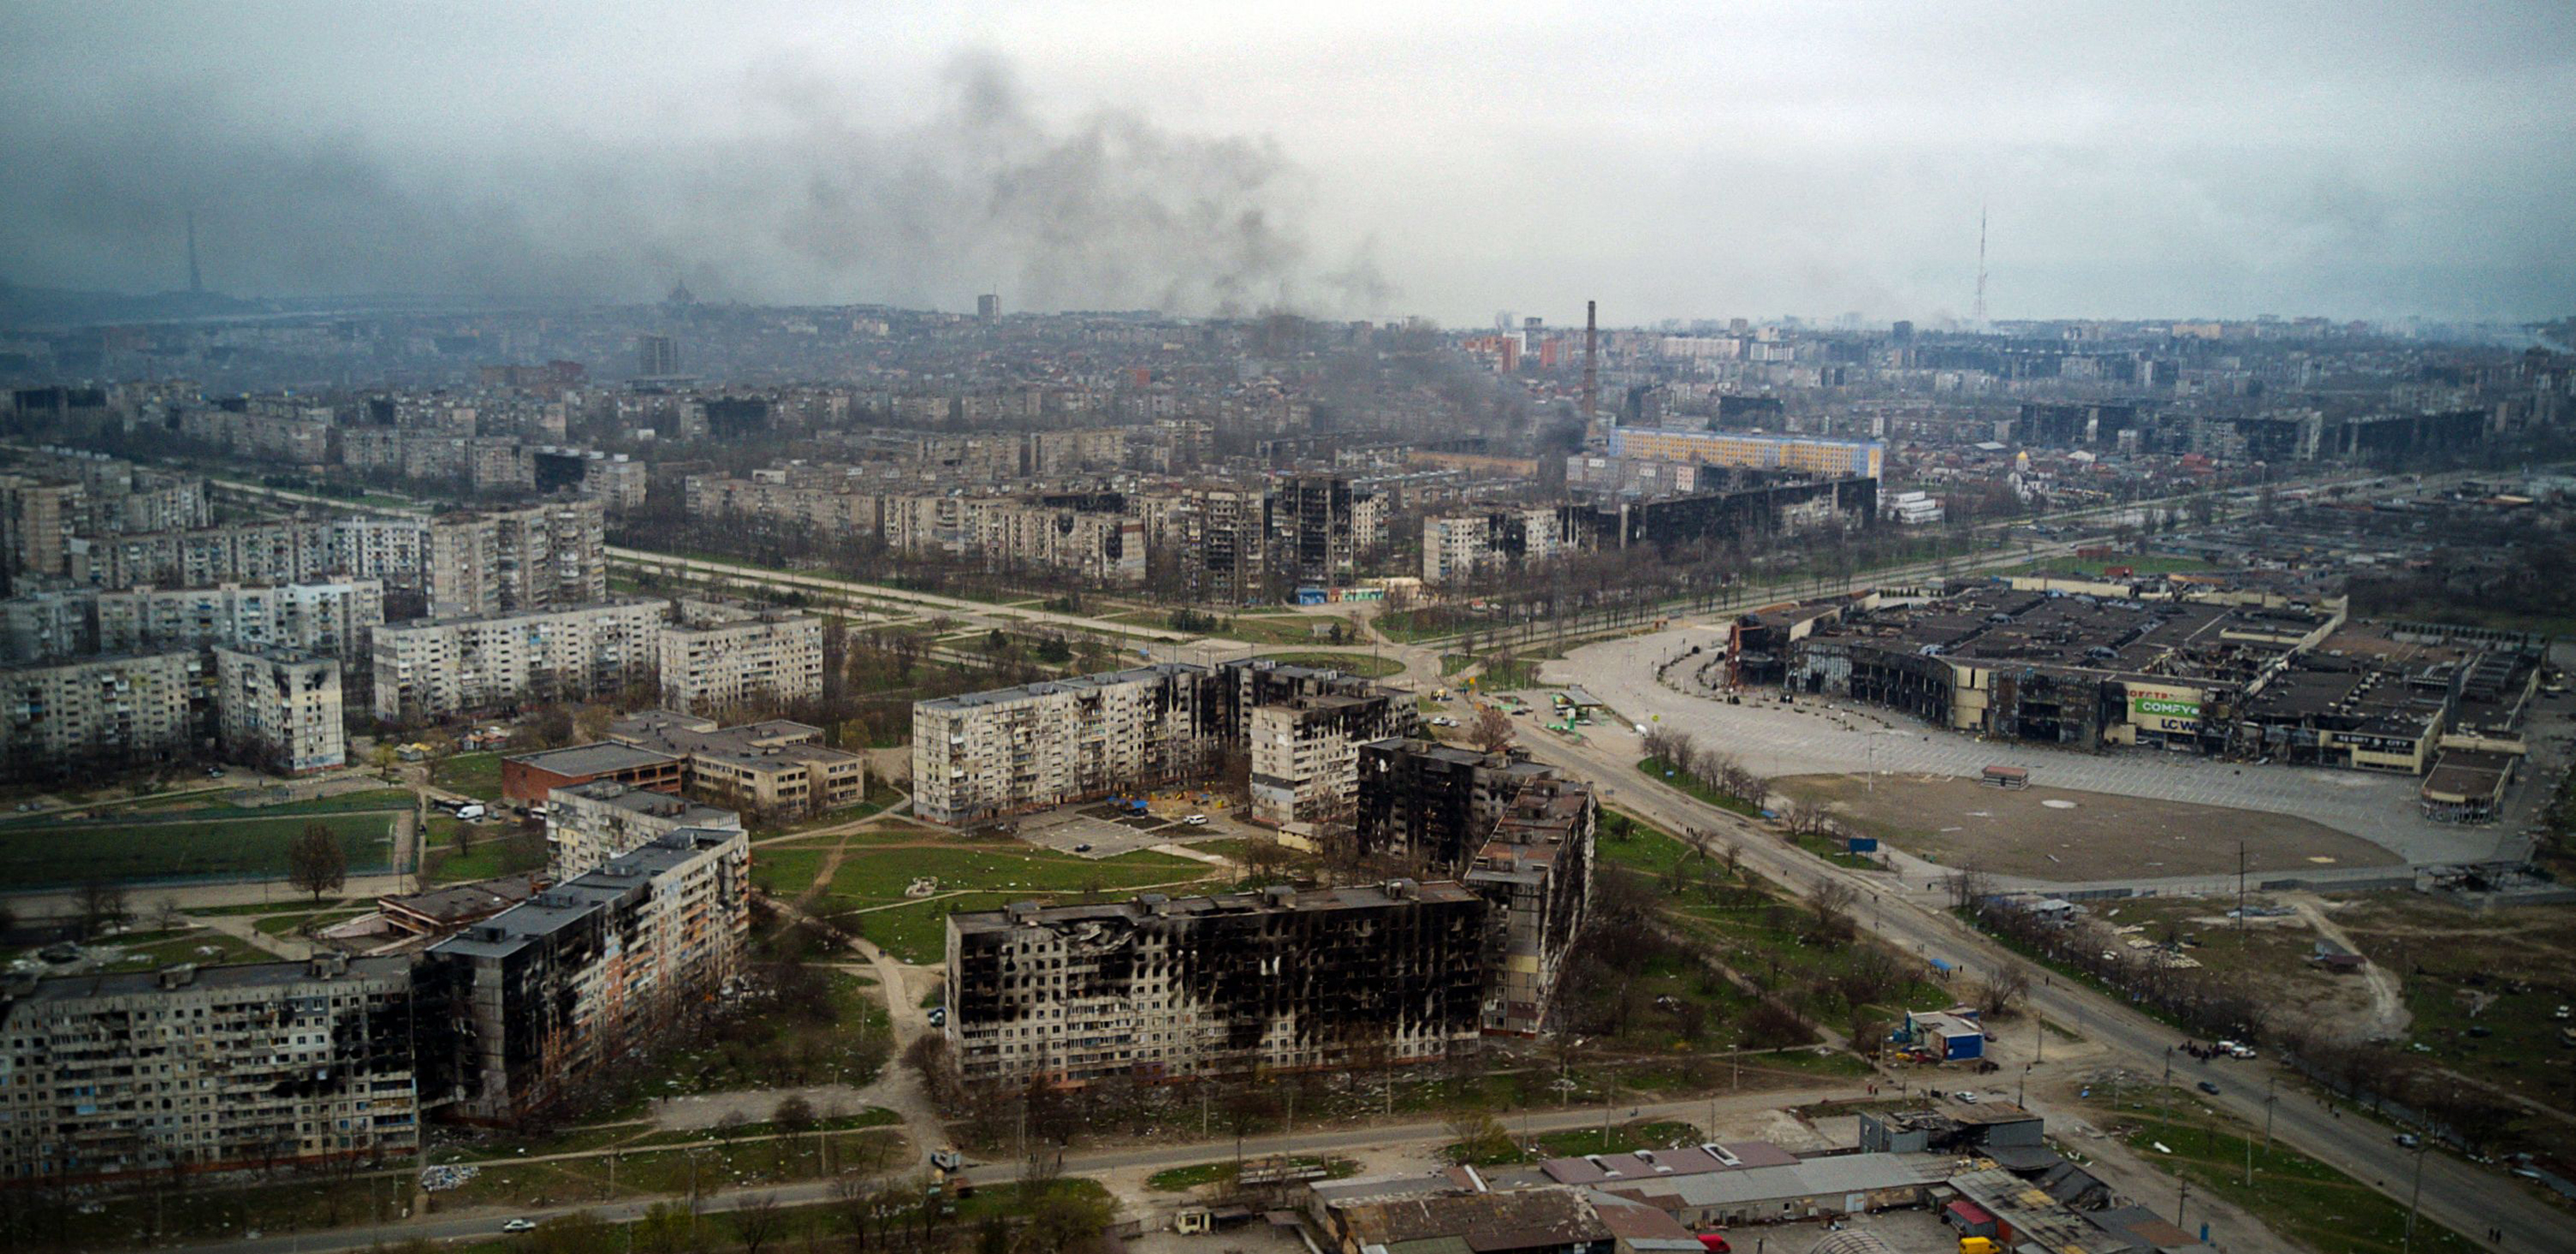 An aerial view of Mariupol, Ukraine on April 12.